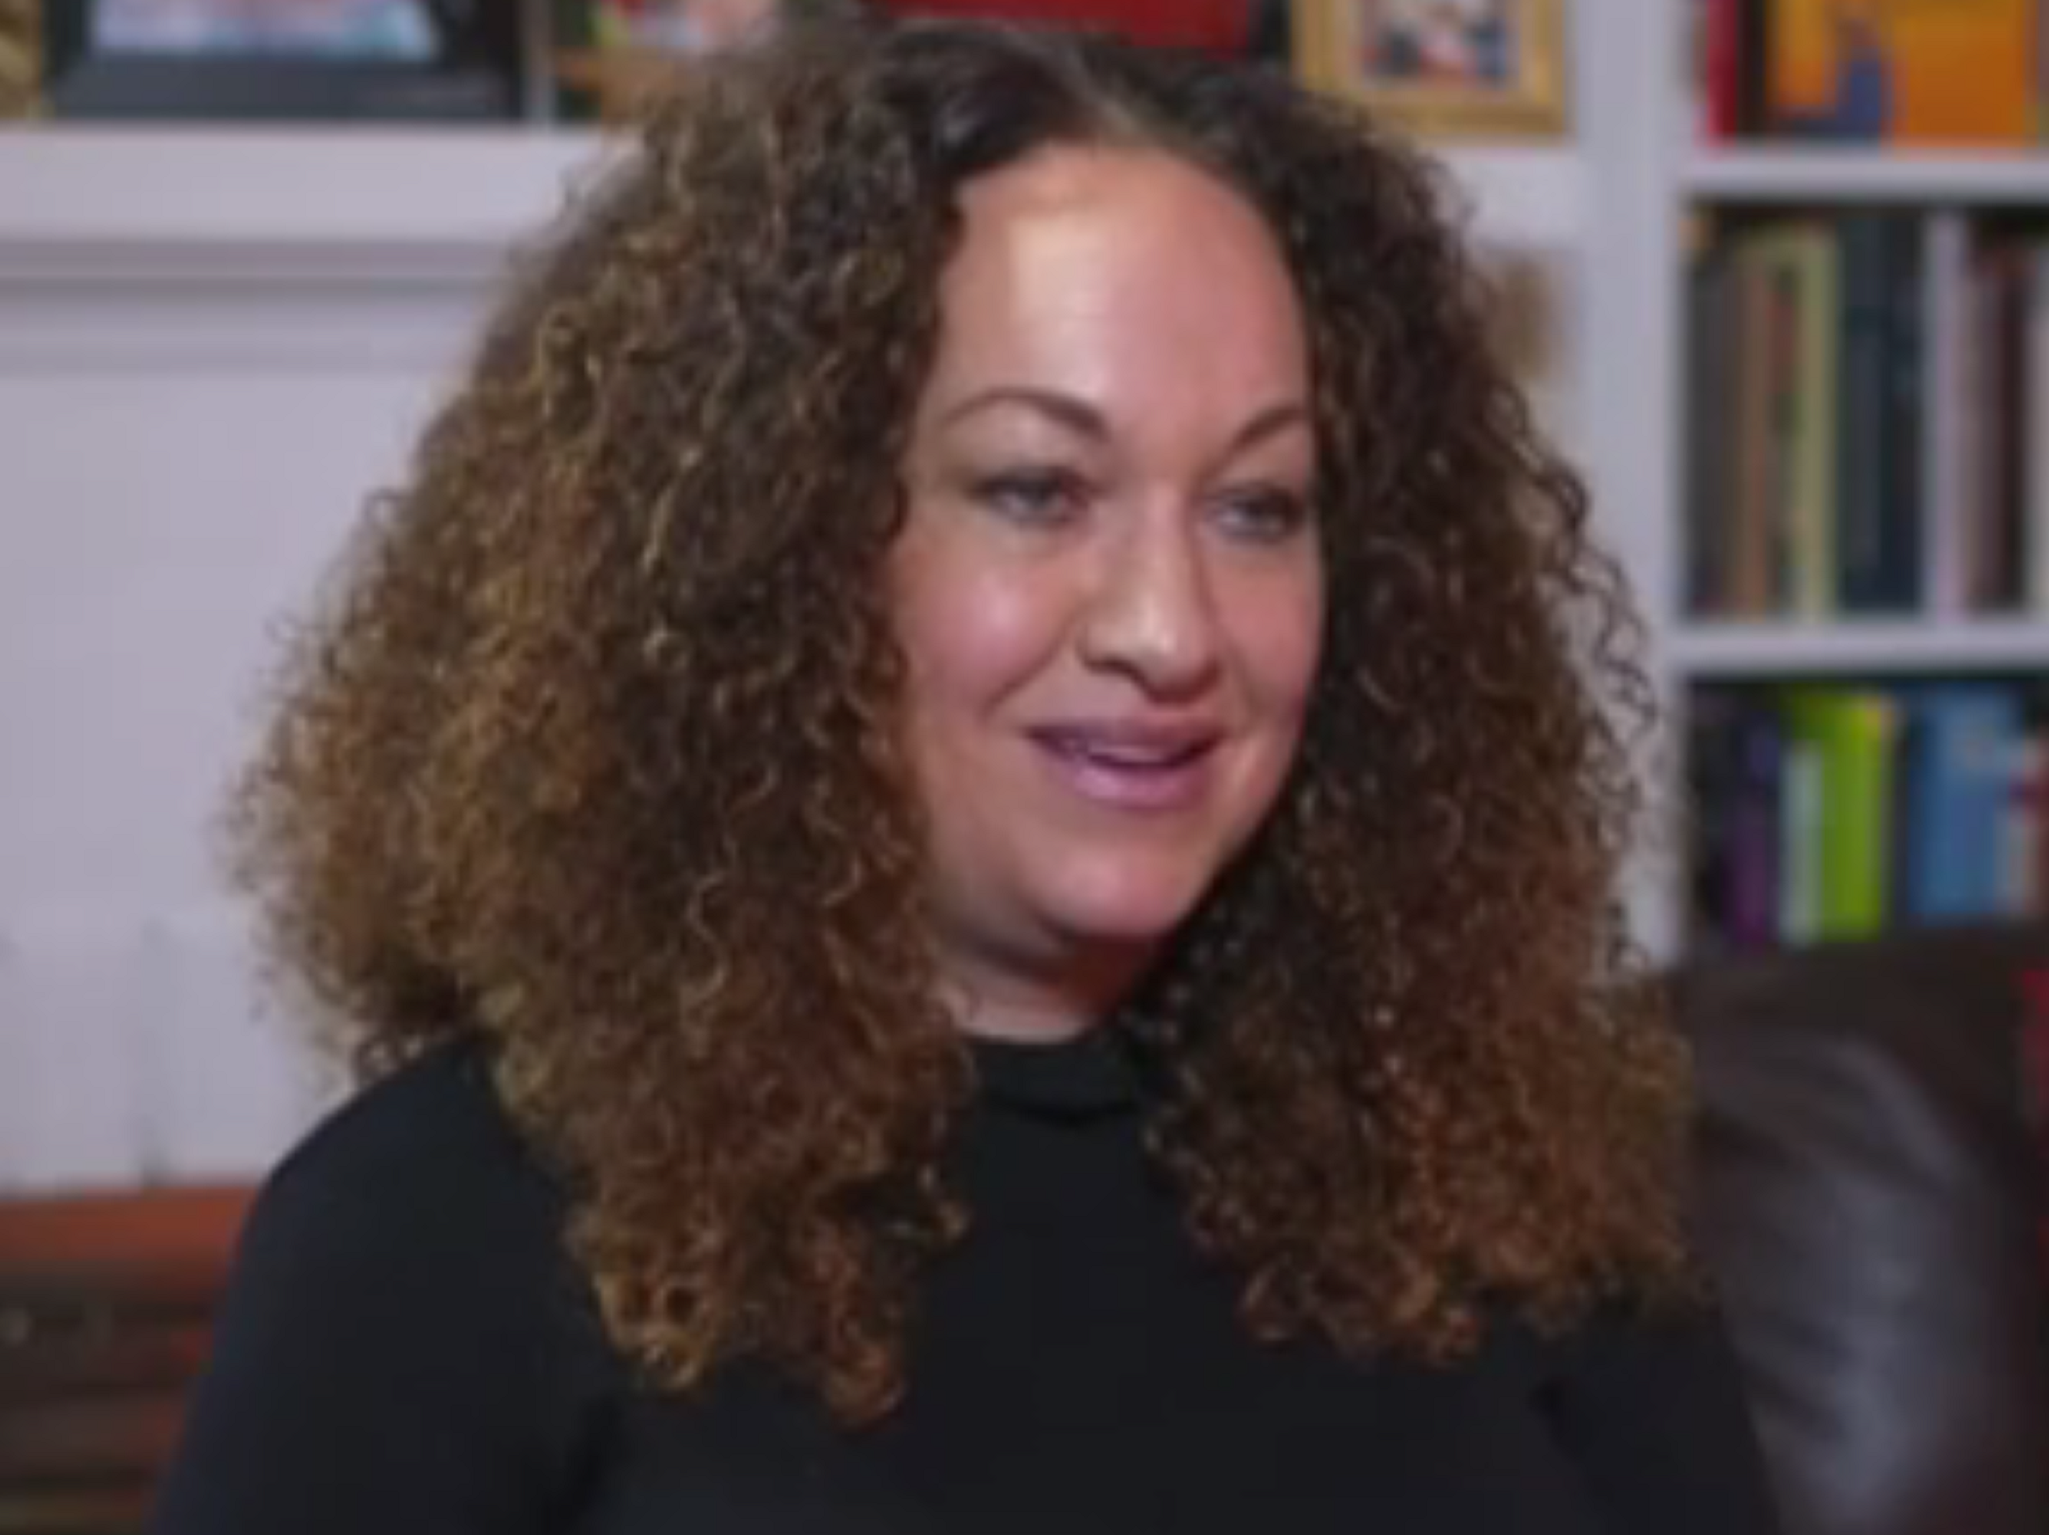 Rachel Dolezal still identifies as black and says she has been 'stigmatised' since being outed as a white woman in 2015